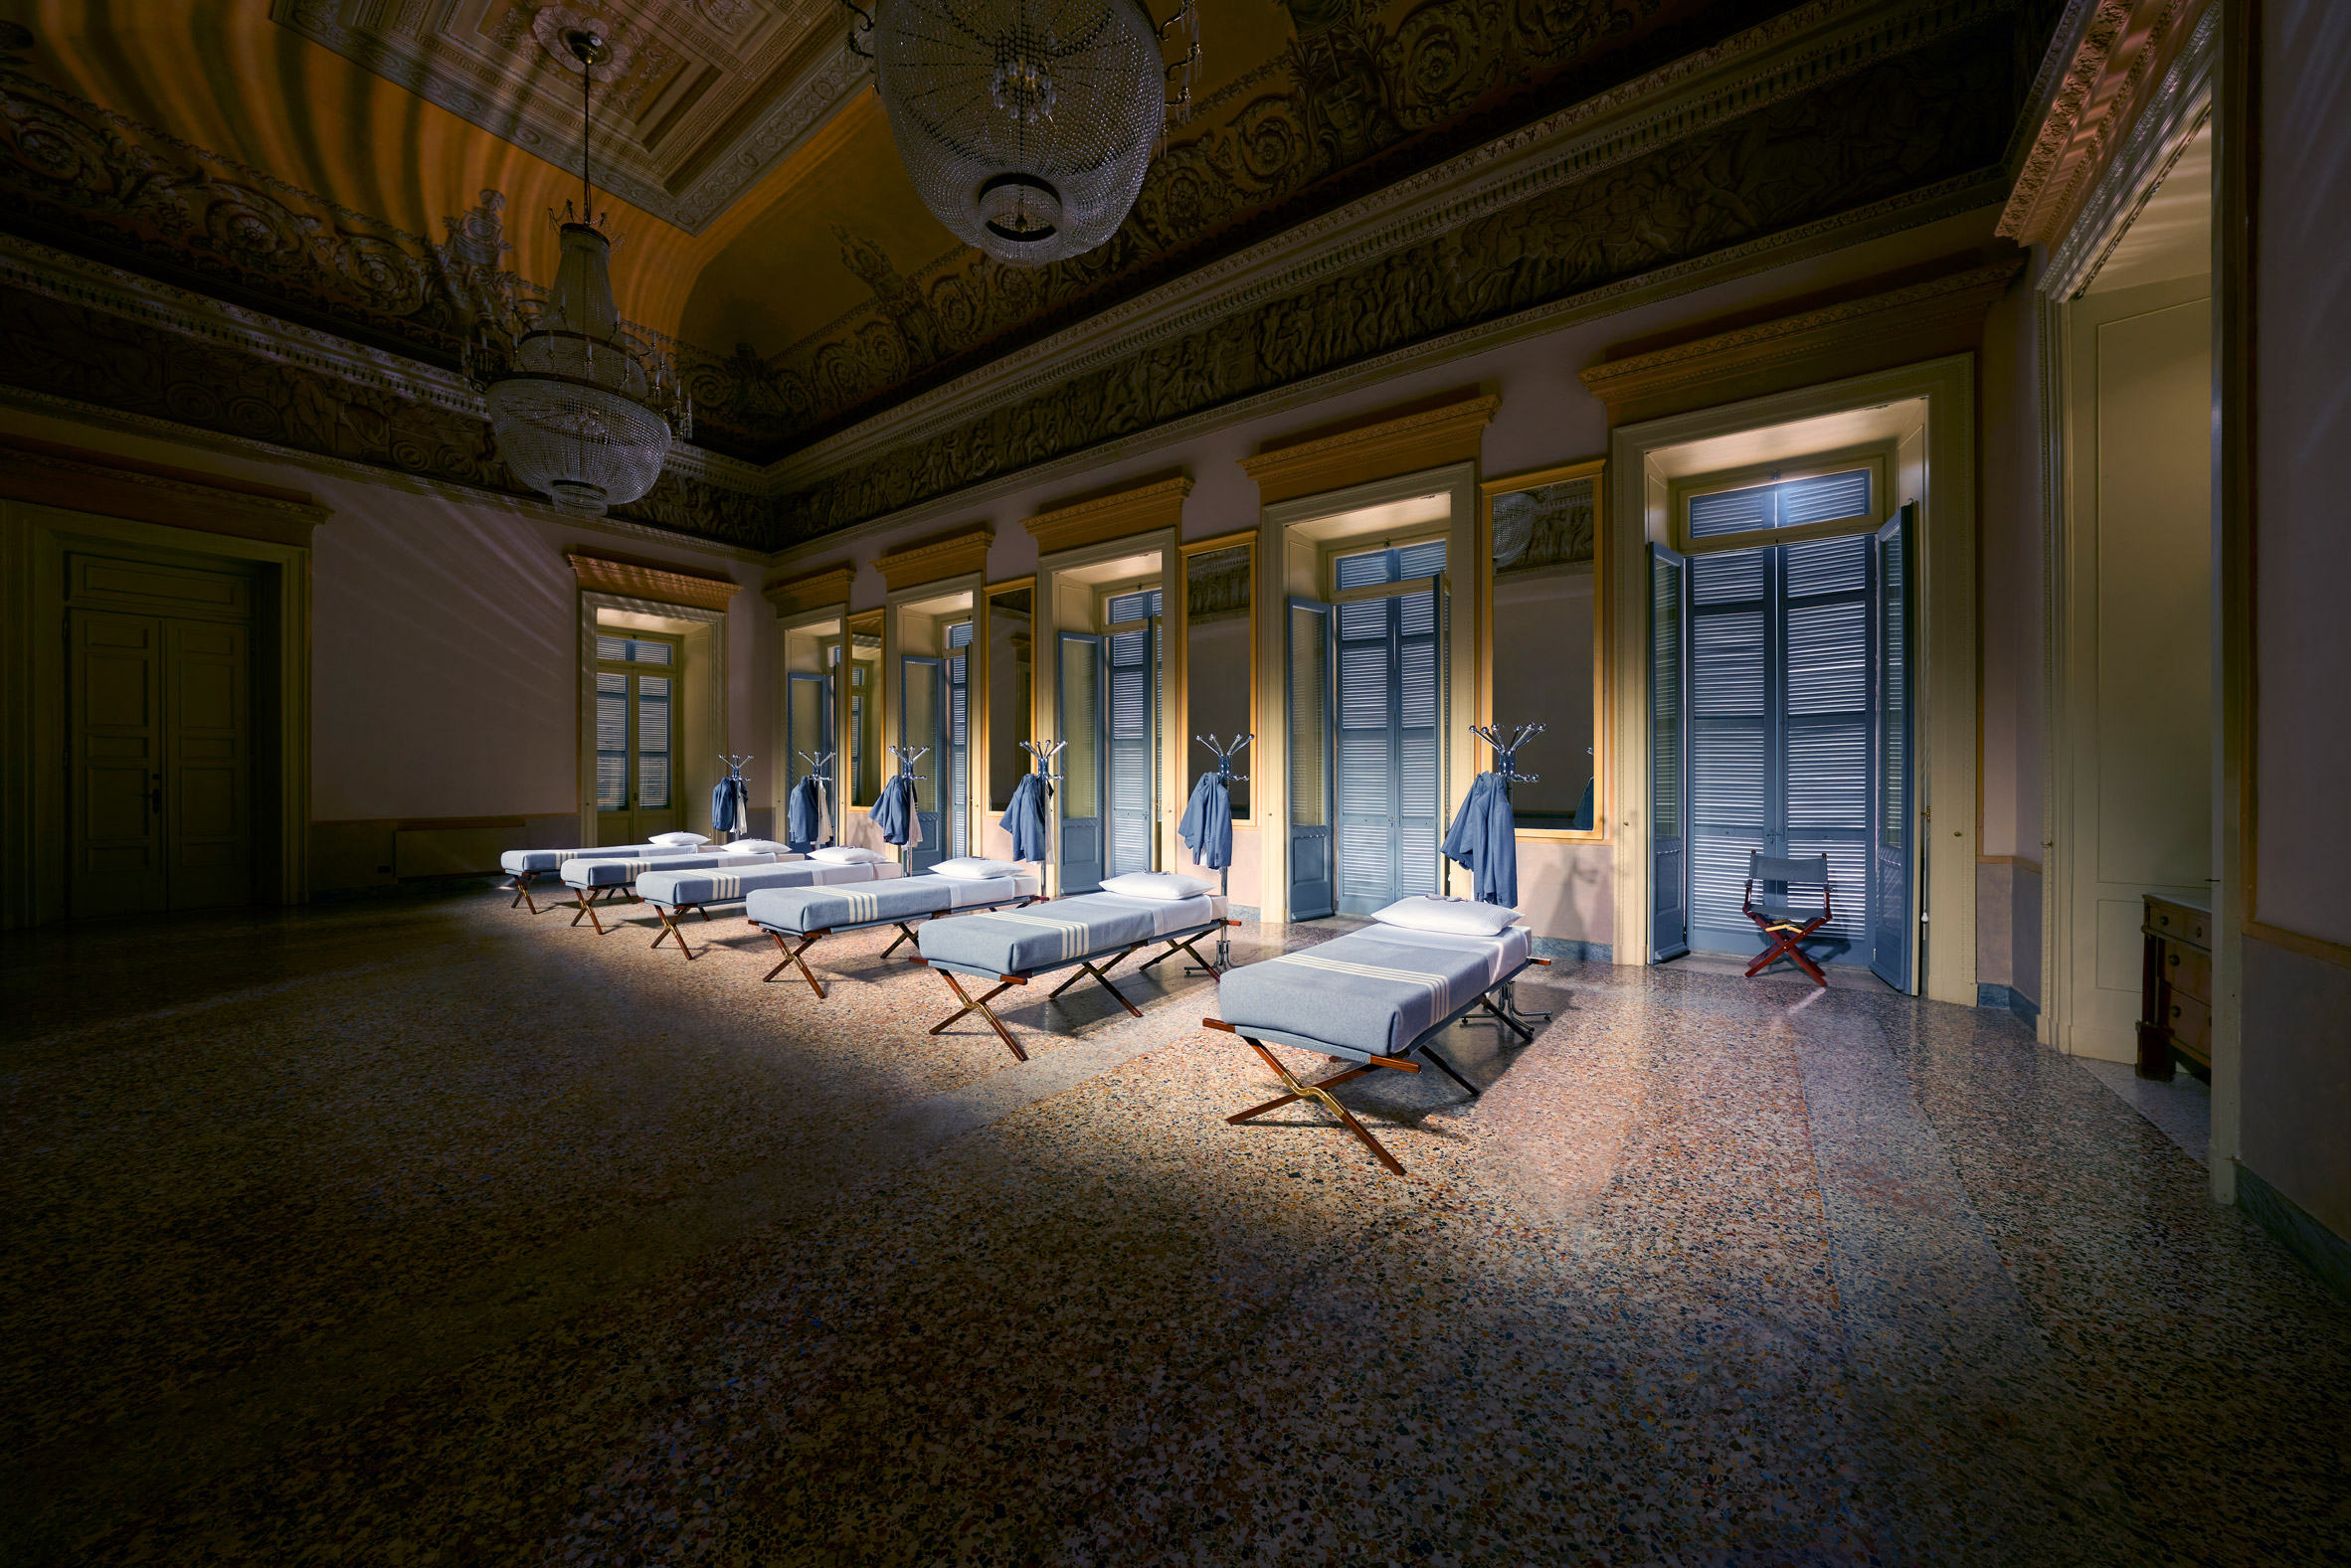 Six identical beds placed in a row inside a decorative salon